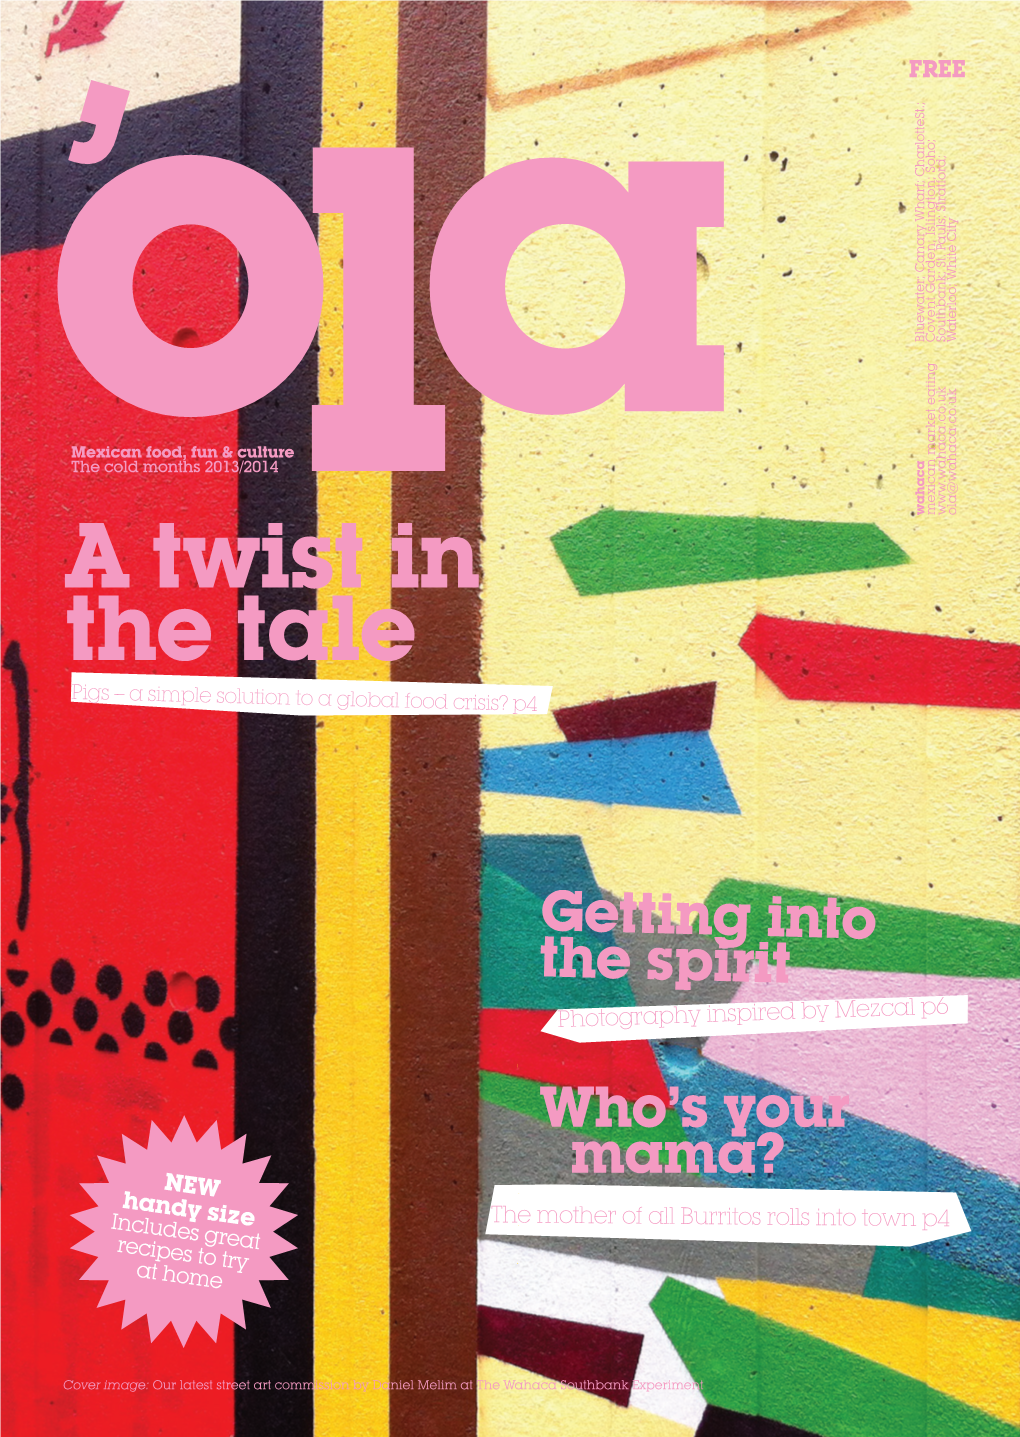 Wahaca Mexican Market Eating Ola@Wahaca.Co.Uk a Twist in the Tale Pigs – a Simple Solution to a Global Food Crisis? P4